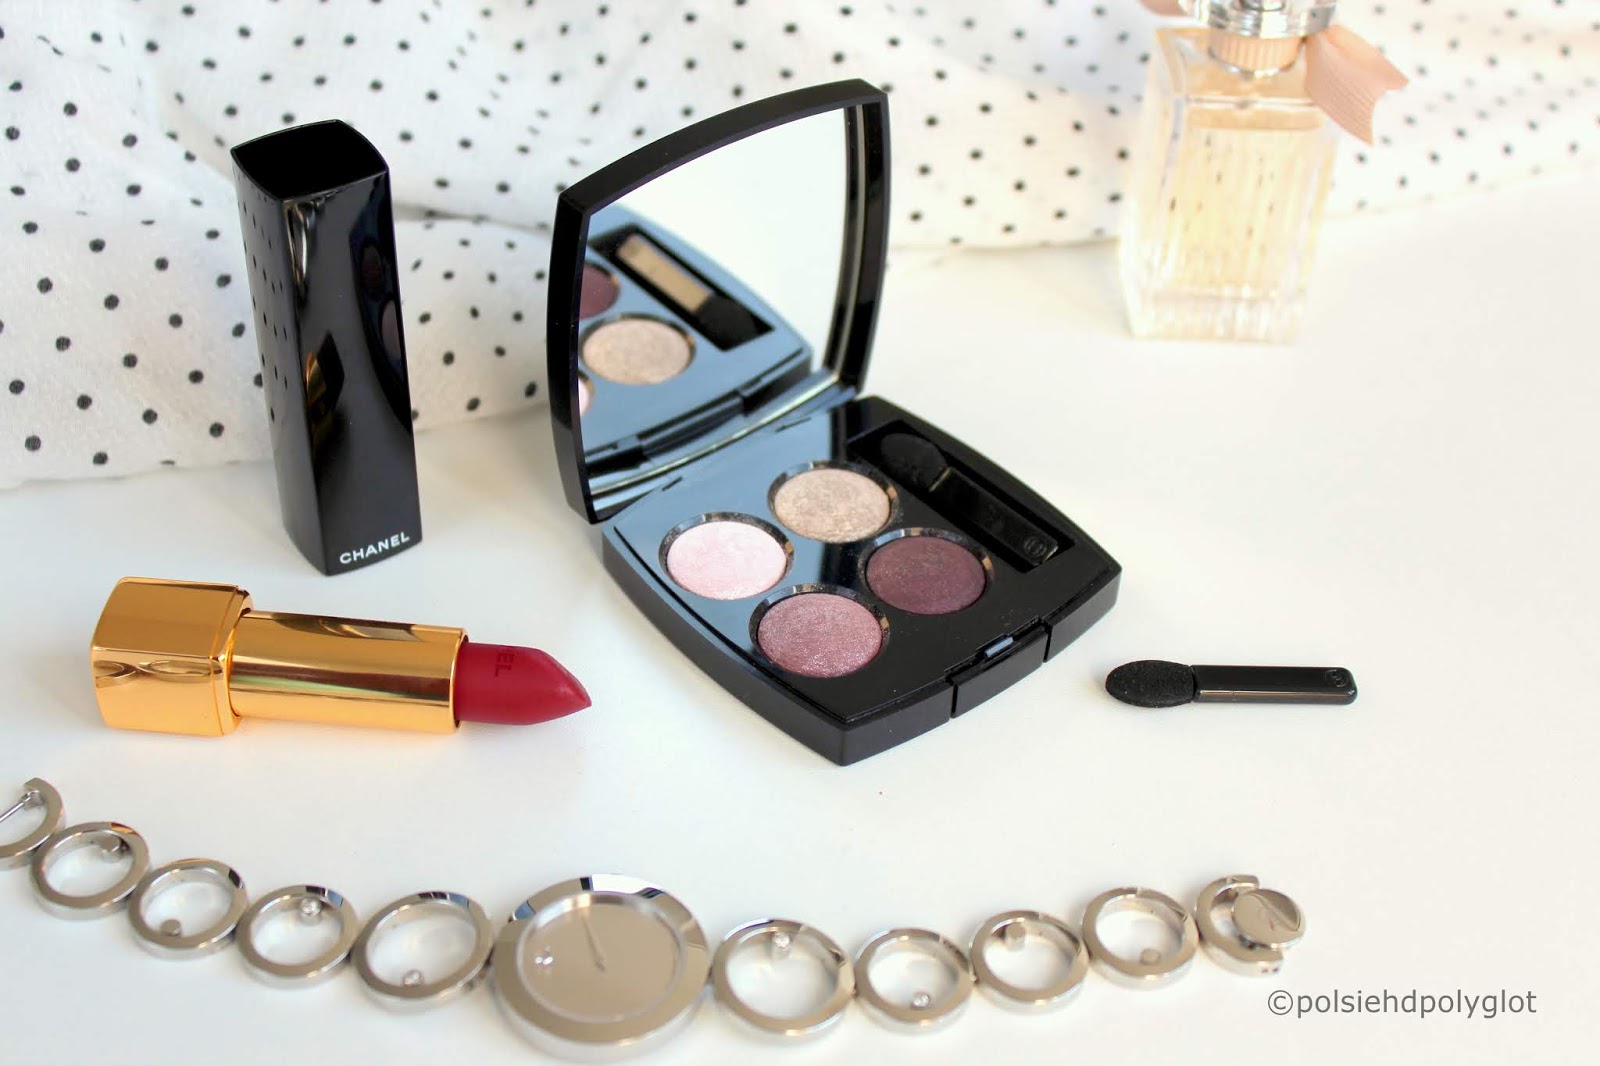 Makeup │ Mauve Smokey eyes and cool tone lips with Chanel